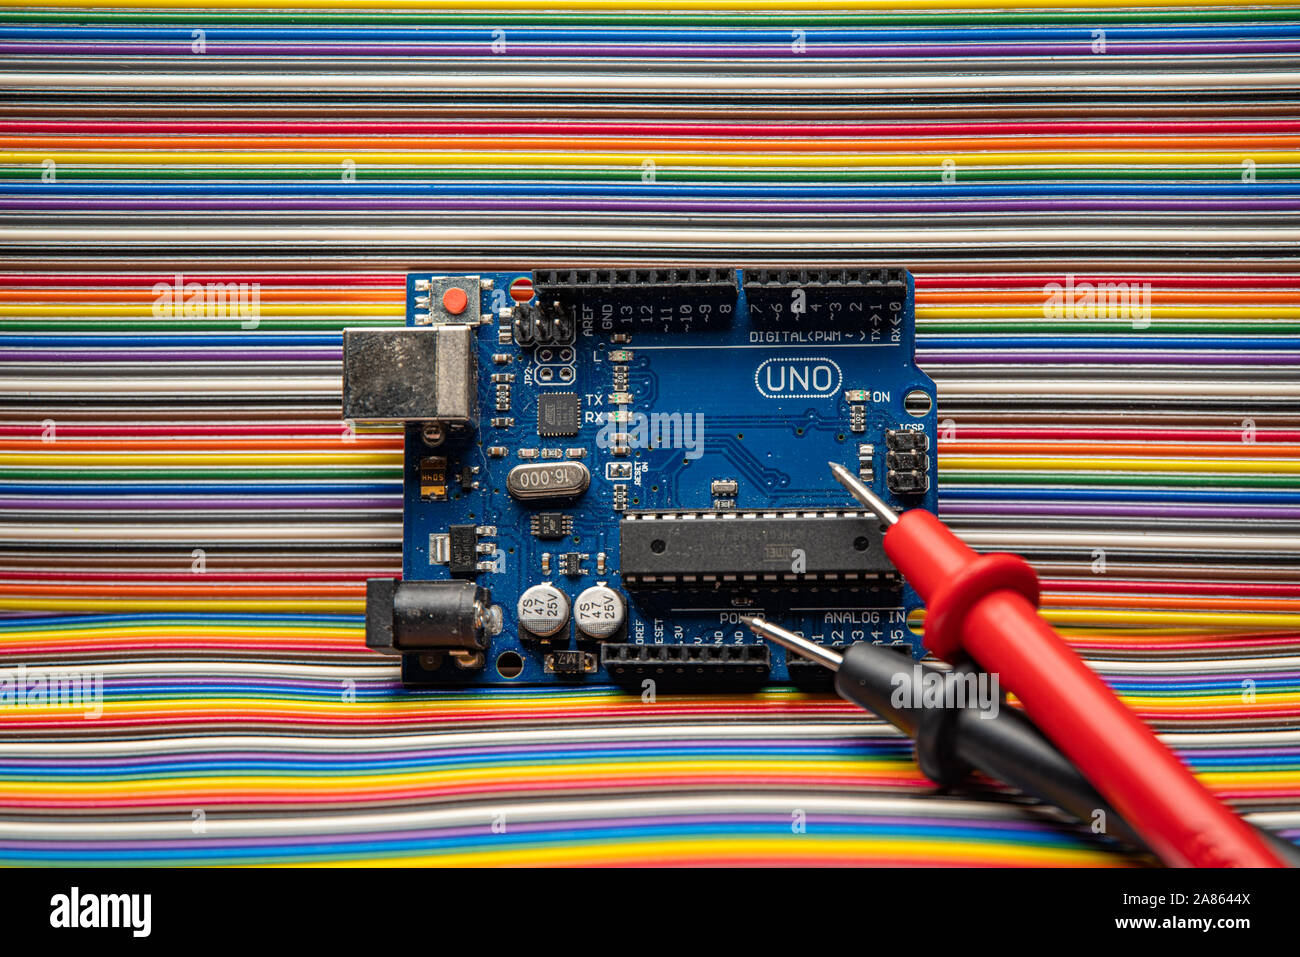 Arduino Uno displayed on jumper wire background with meter probes. Stock Photo